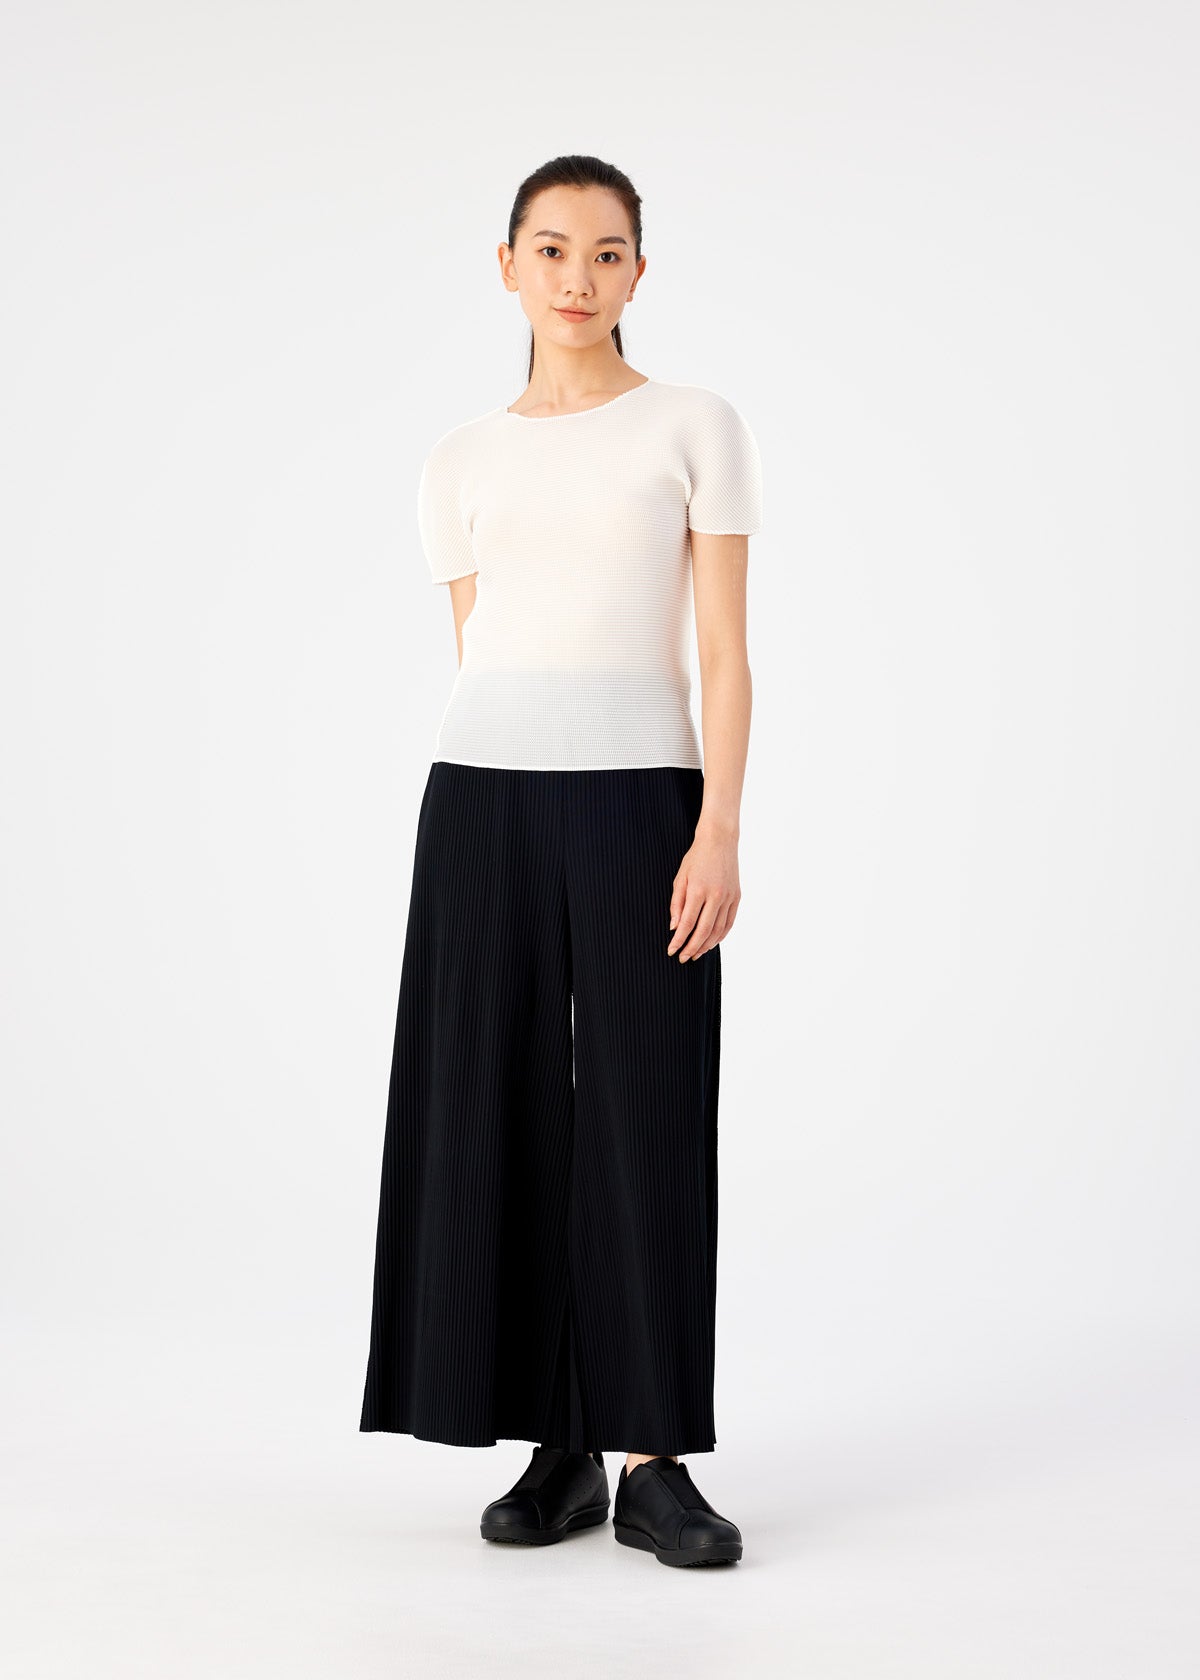 FINE KNIT PLEATS BLACK PANTS  The official ISSEY MIYAKE ONLINE